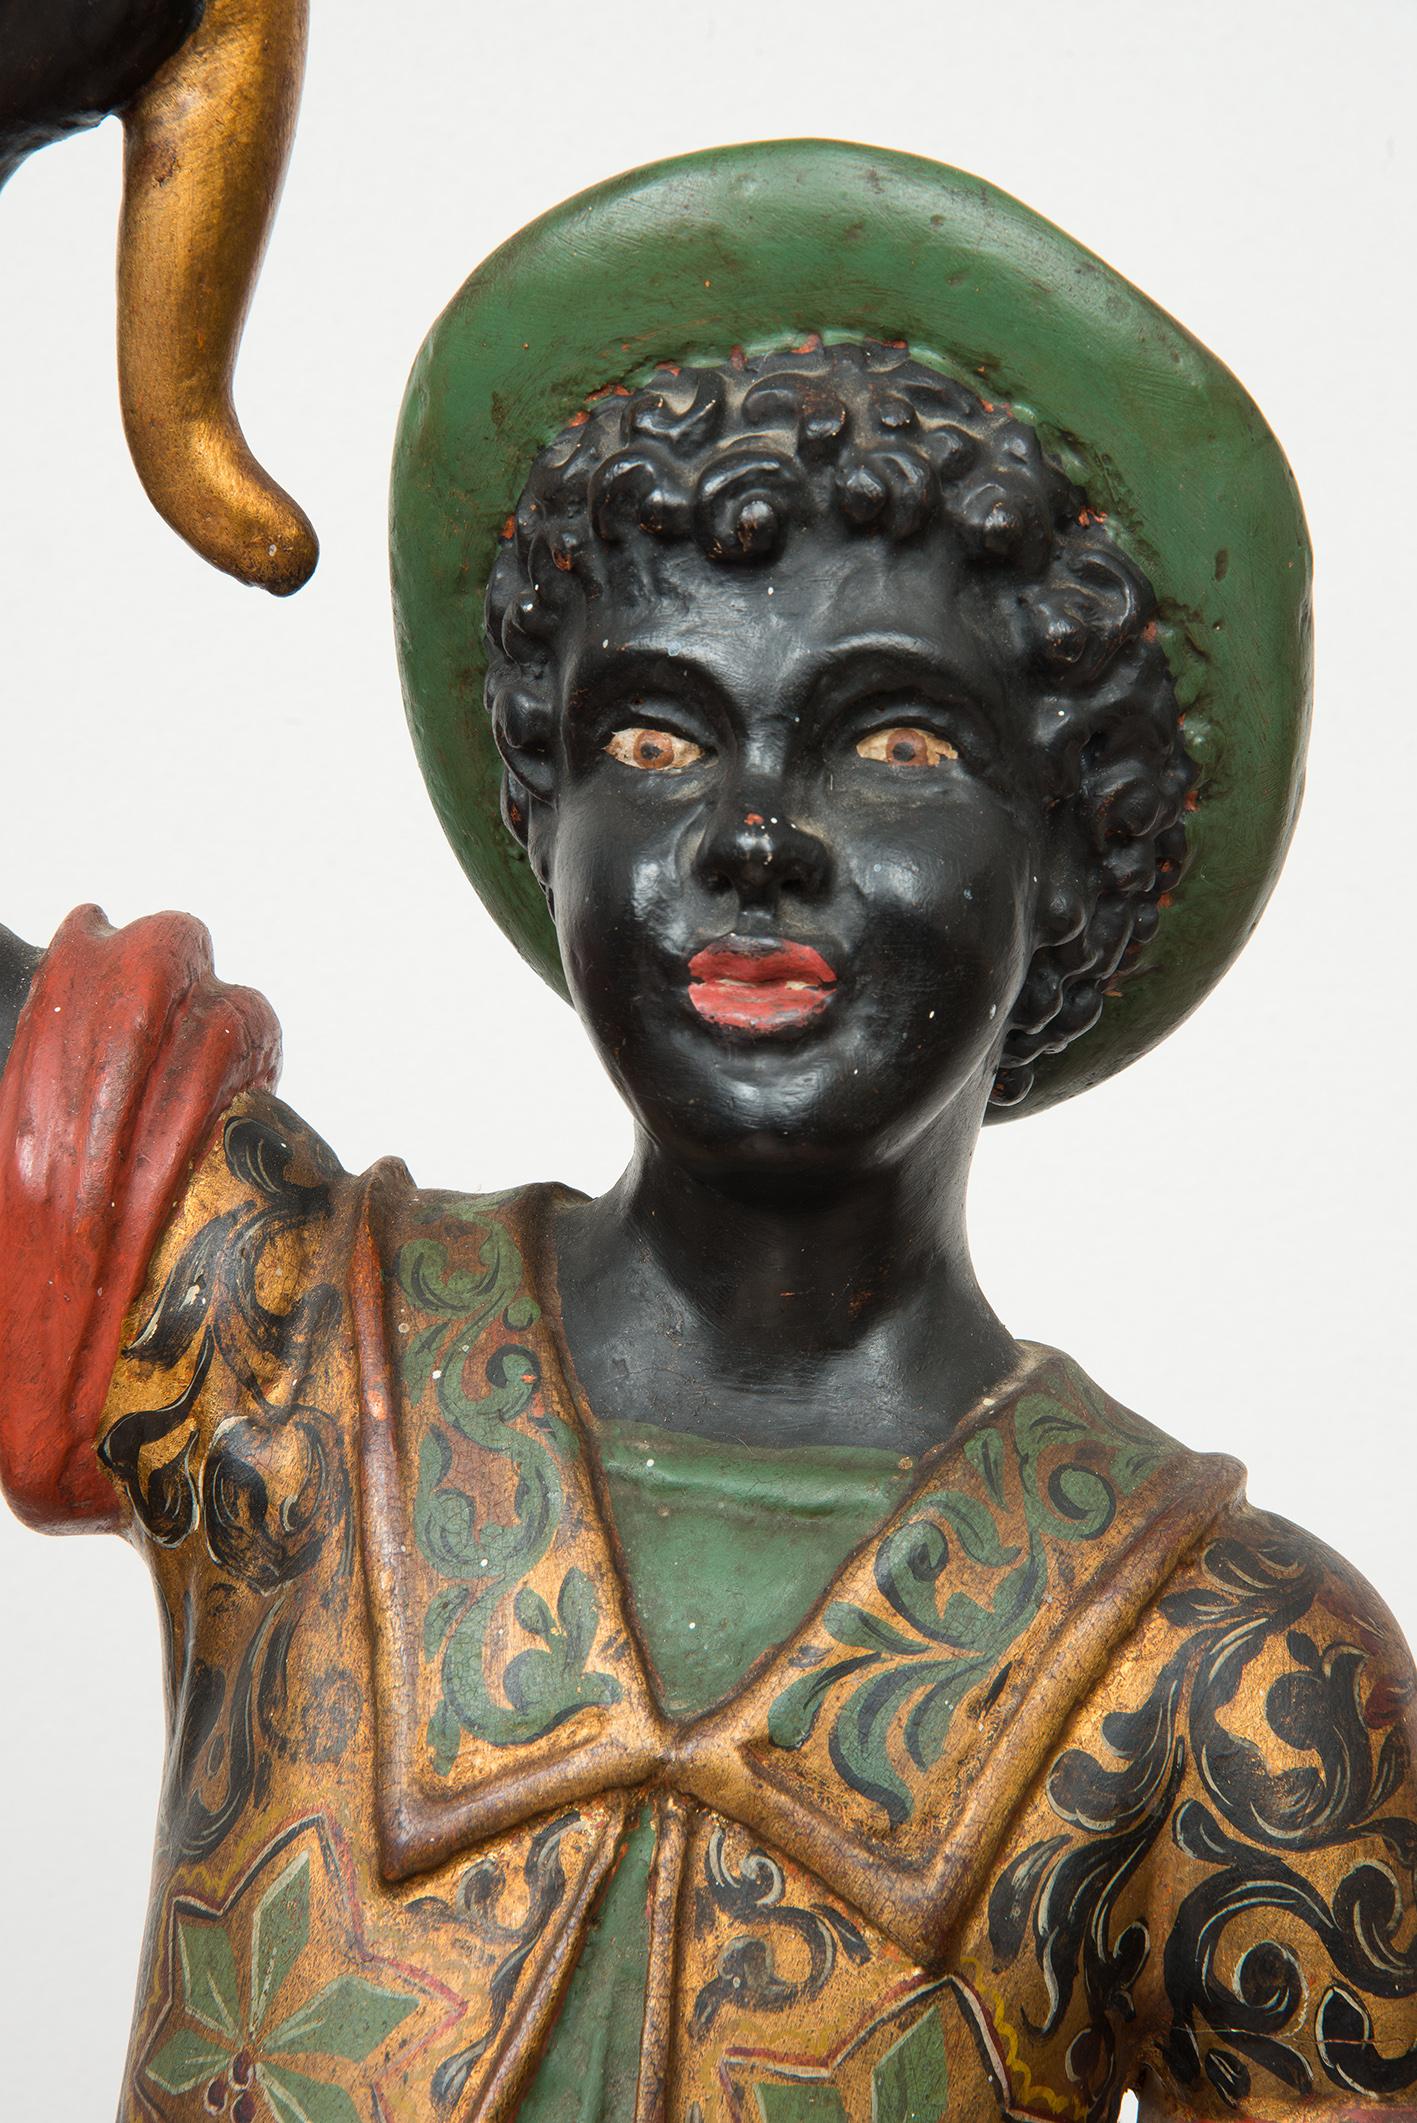 Antique polychrome wood sculpture depicting the Moor of Venice.19th century - Sculpture by Unknown